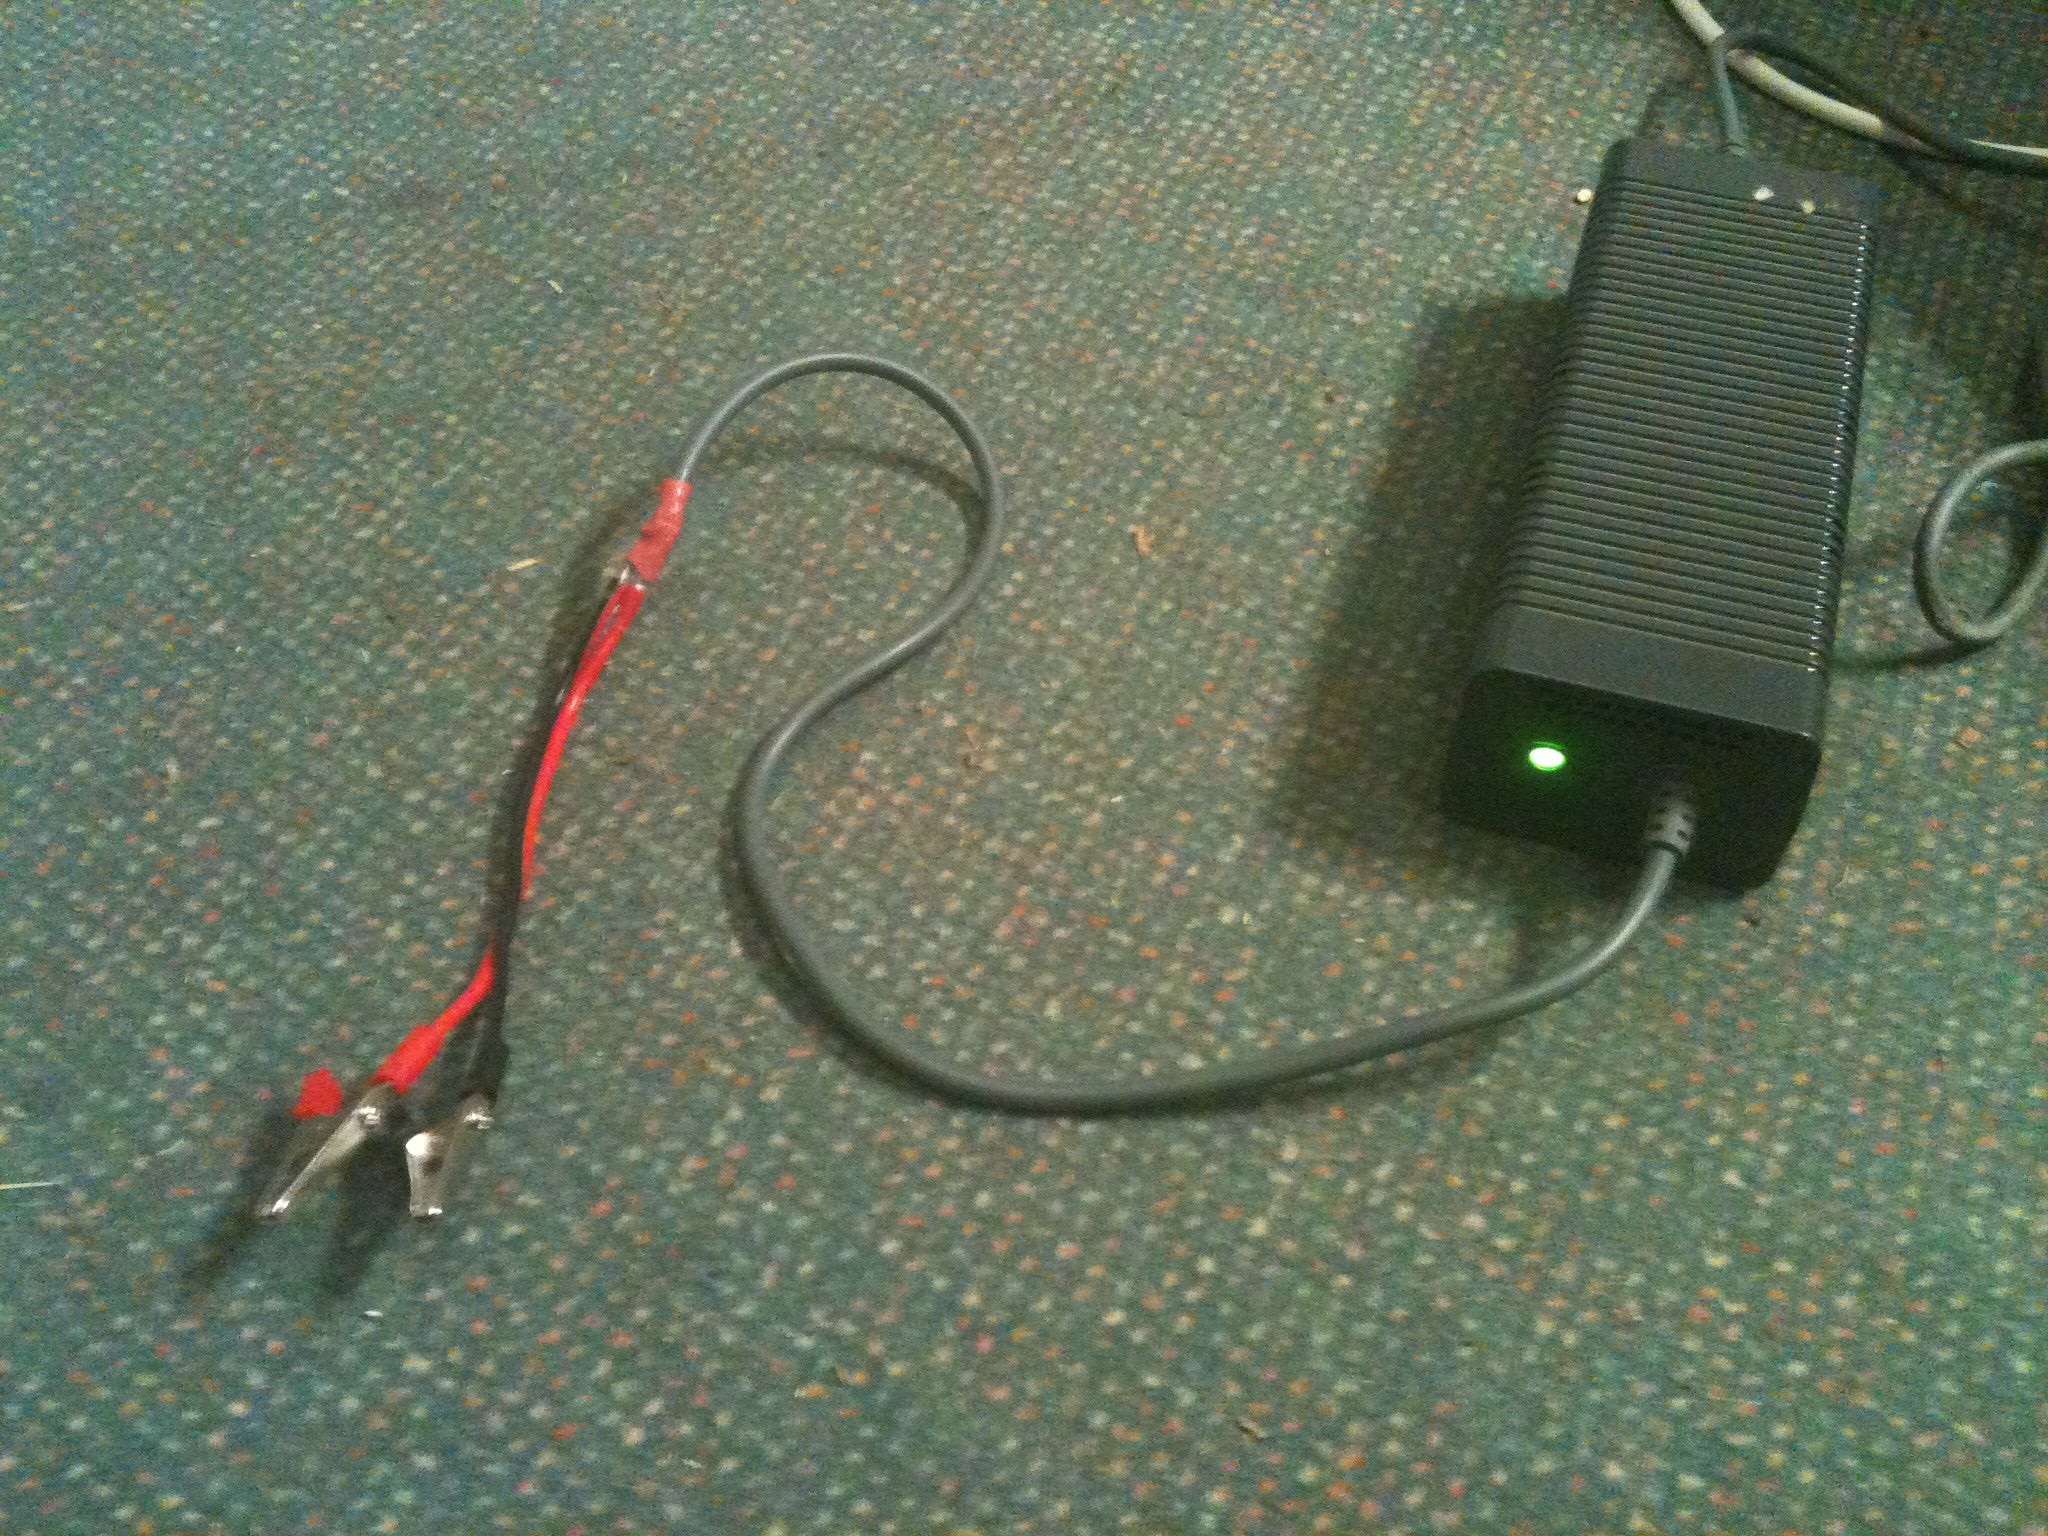 Xbox 360 Power Supply Pinout How to Turn An X Box 360 Psu Into A 12v Lab Psu 7 Steps Of Xbox 360 Power Supply Pinout